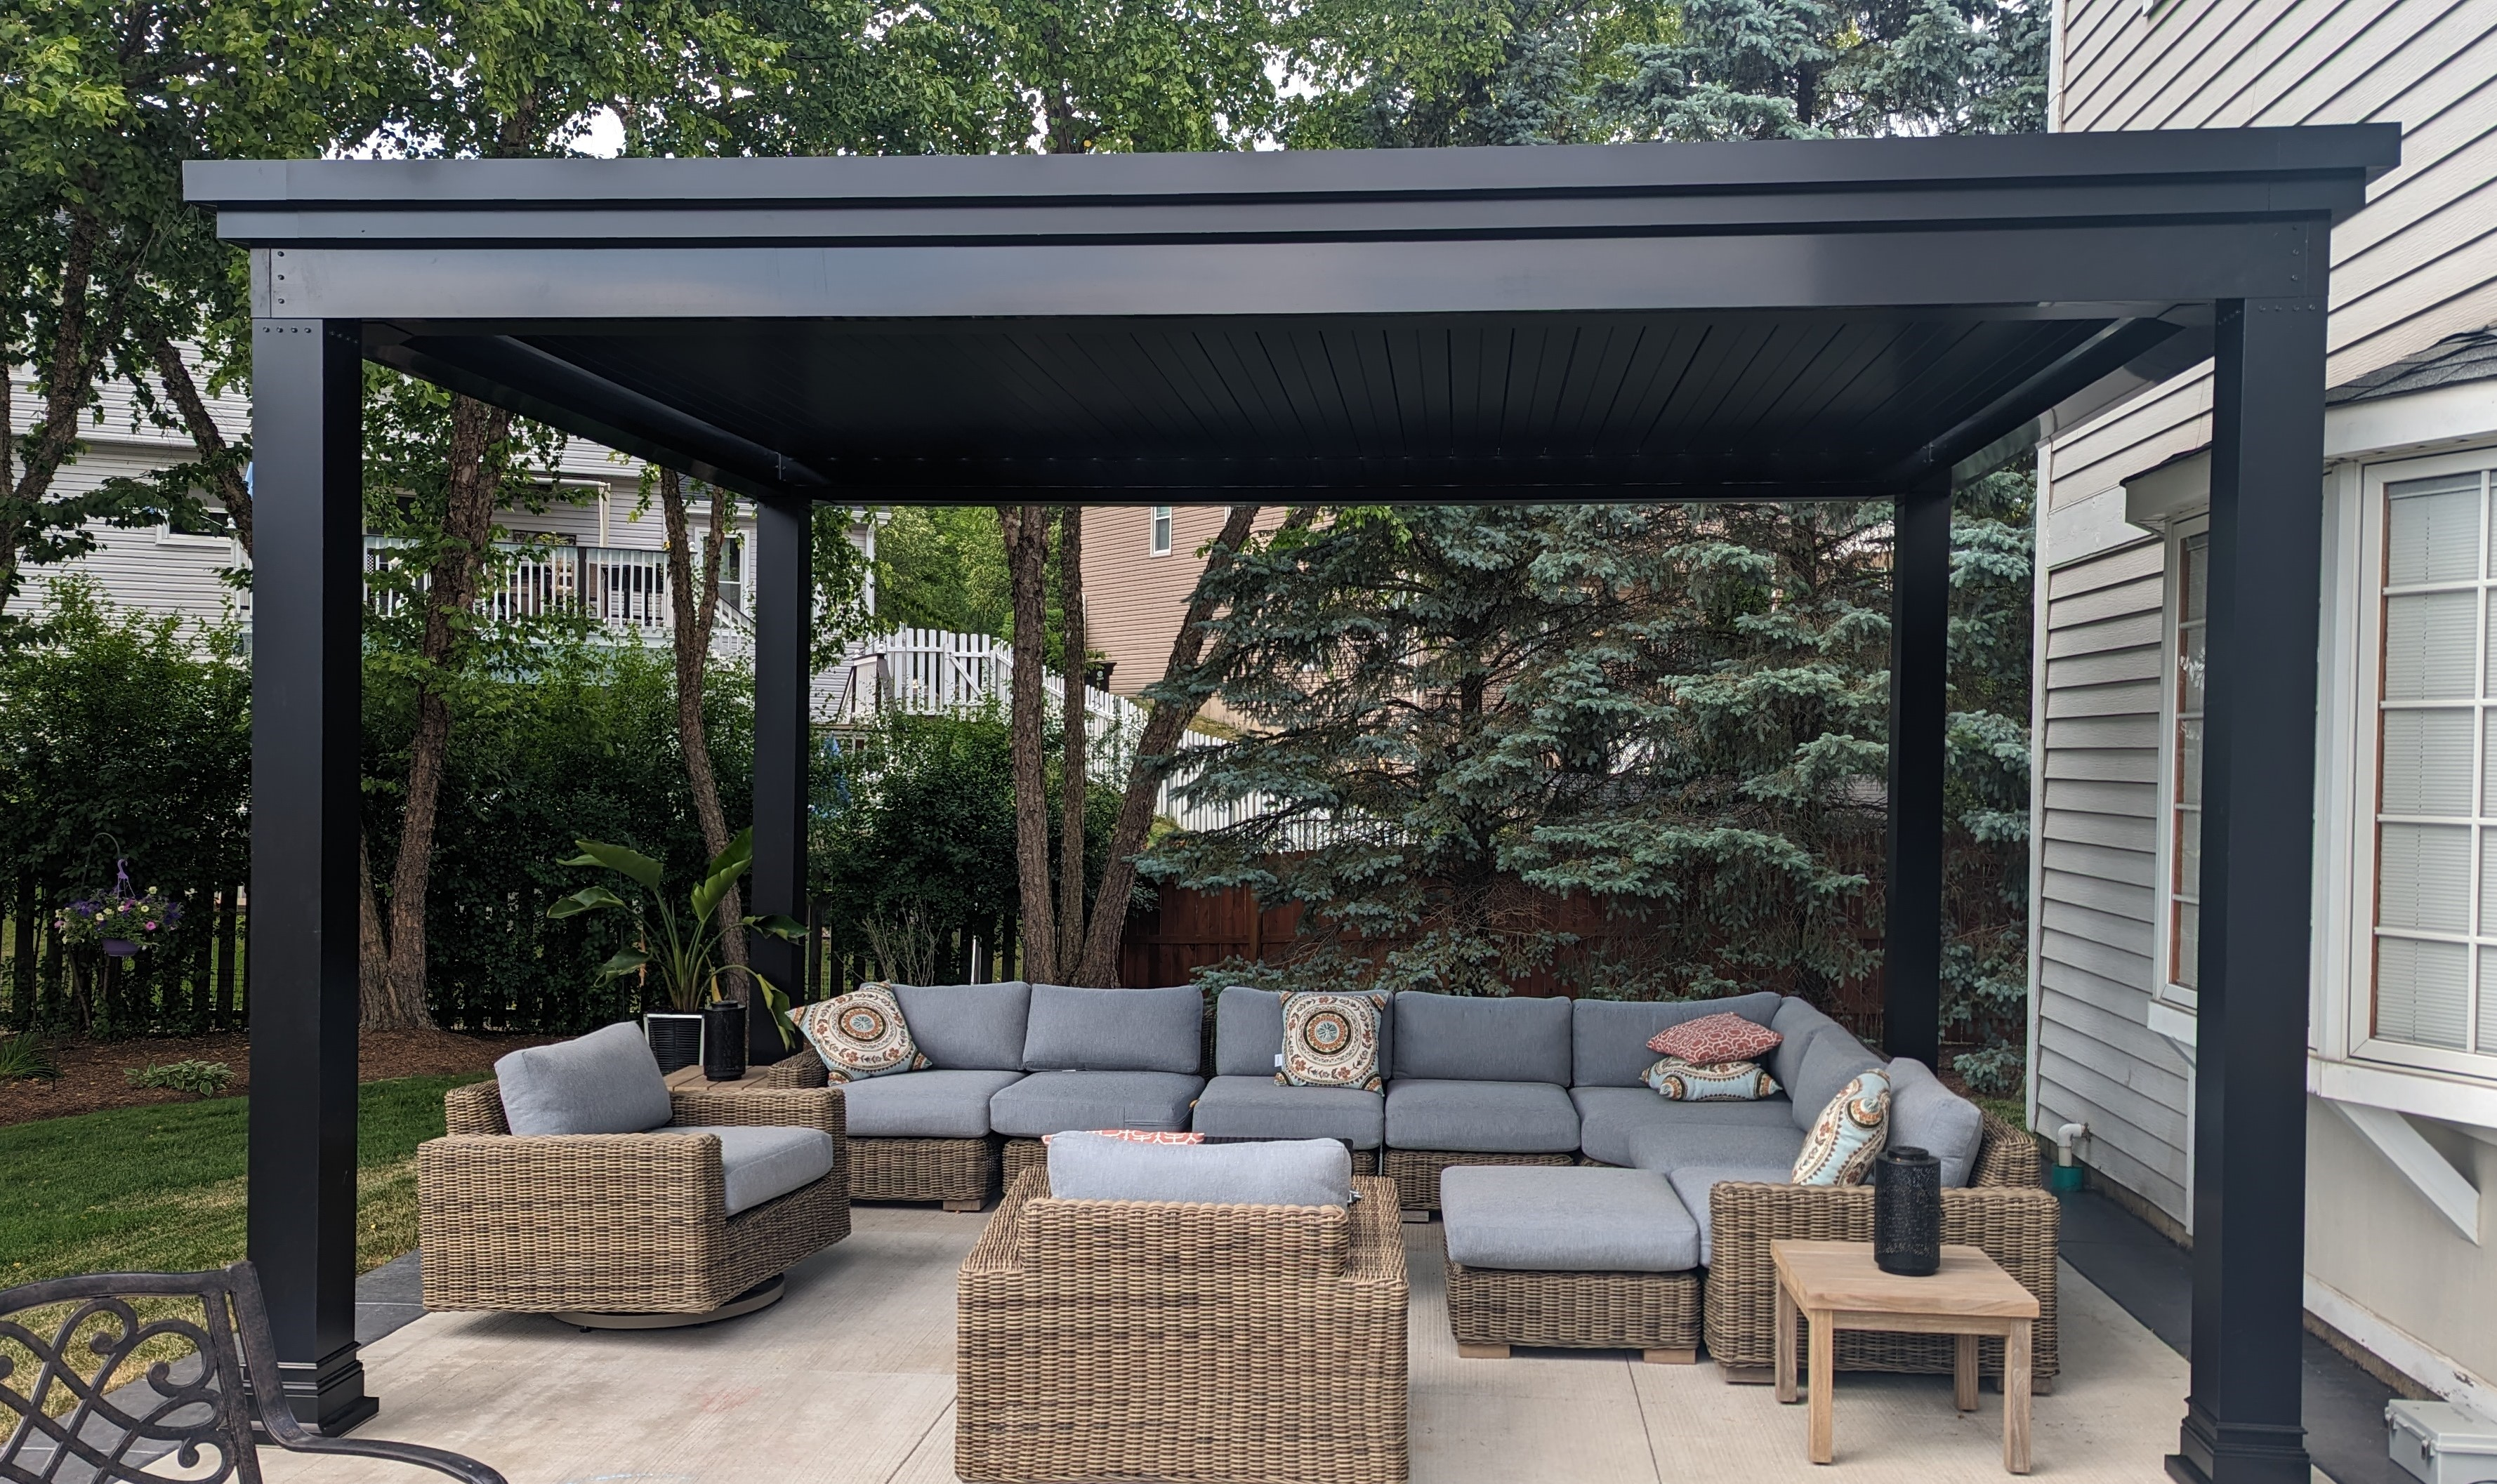 aluminum pergolas are great patio cover with various pergola styles available you can find your own pergola being the perfect pergola